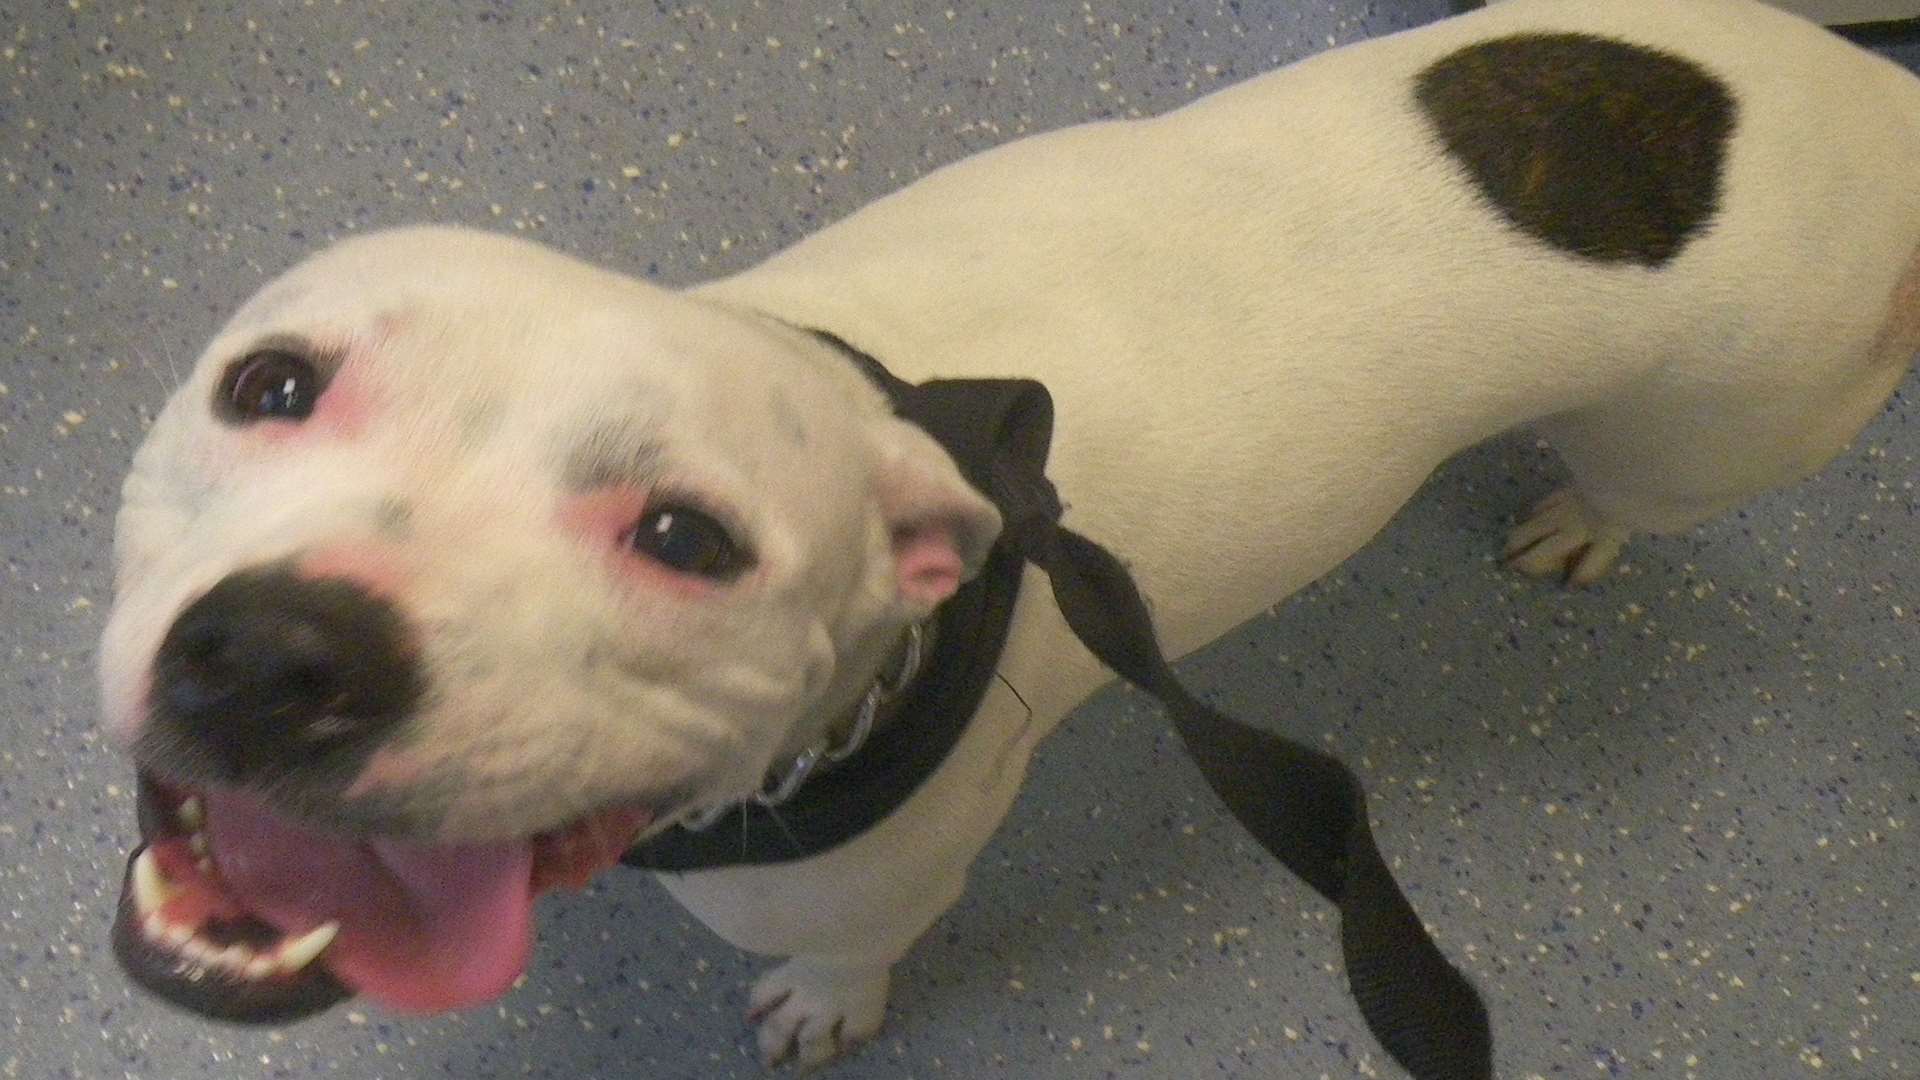 The staffie rescued from a sweltering conservatory